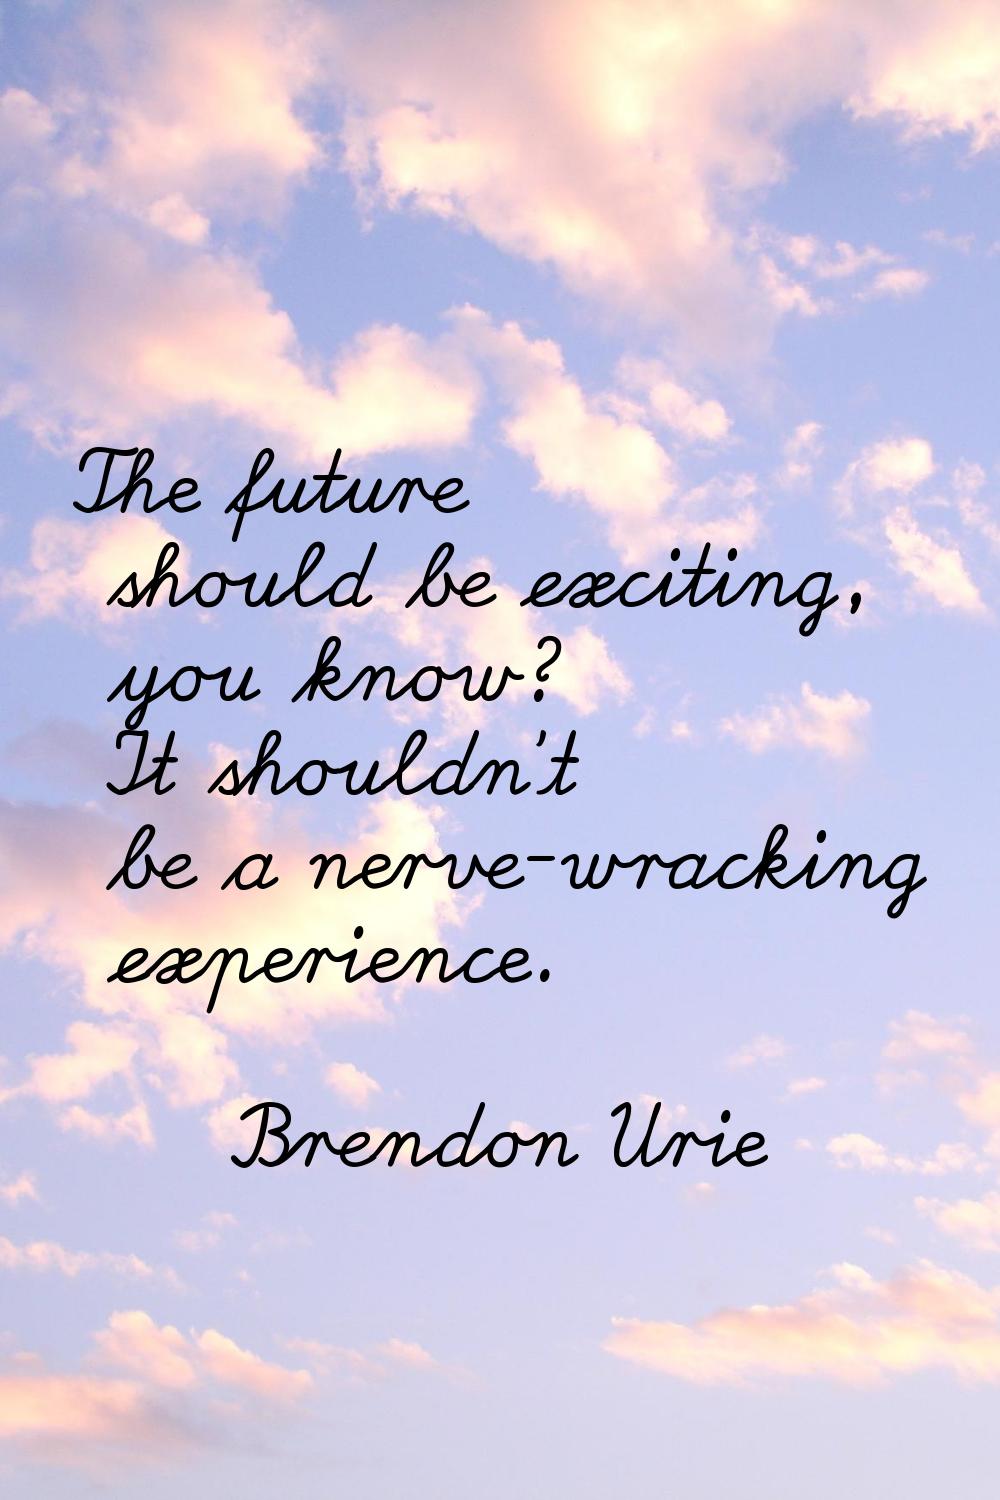 The future should be exciting, you know? It shouldn't be a nerve-wracking experience.